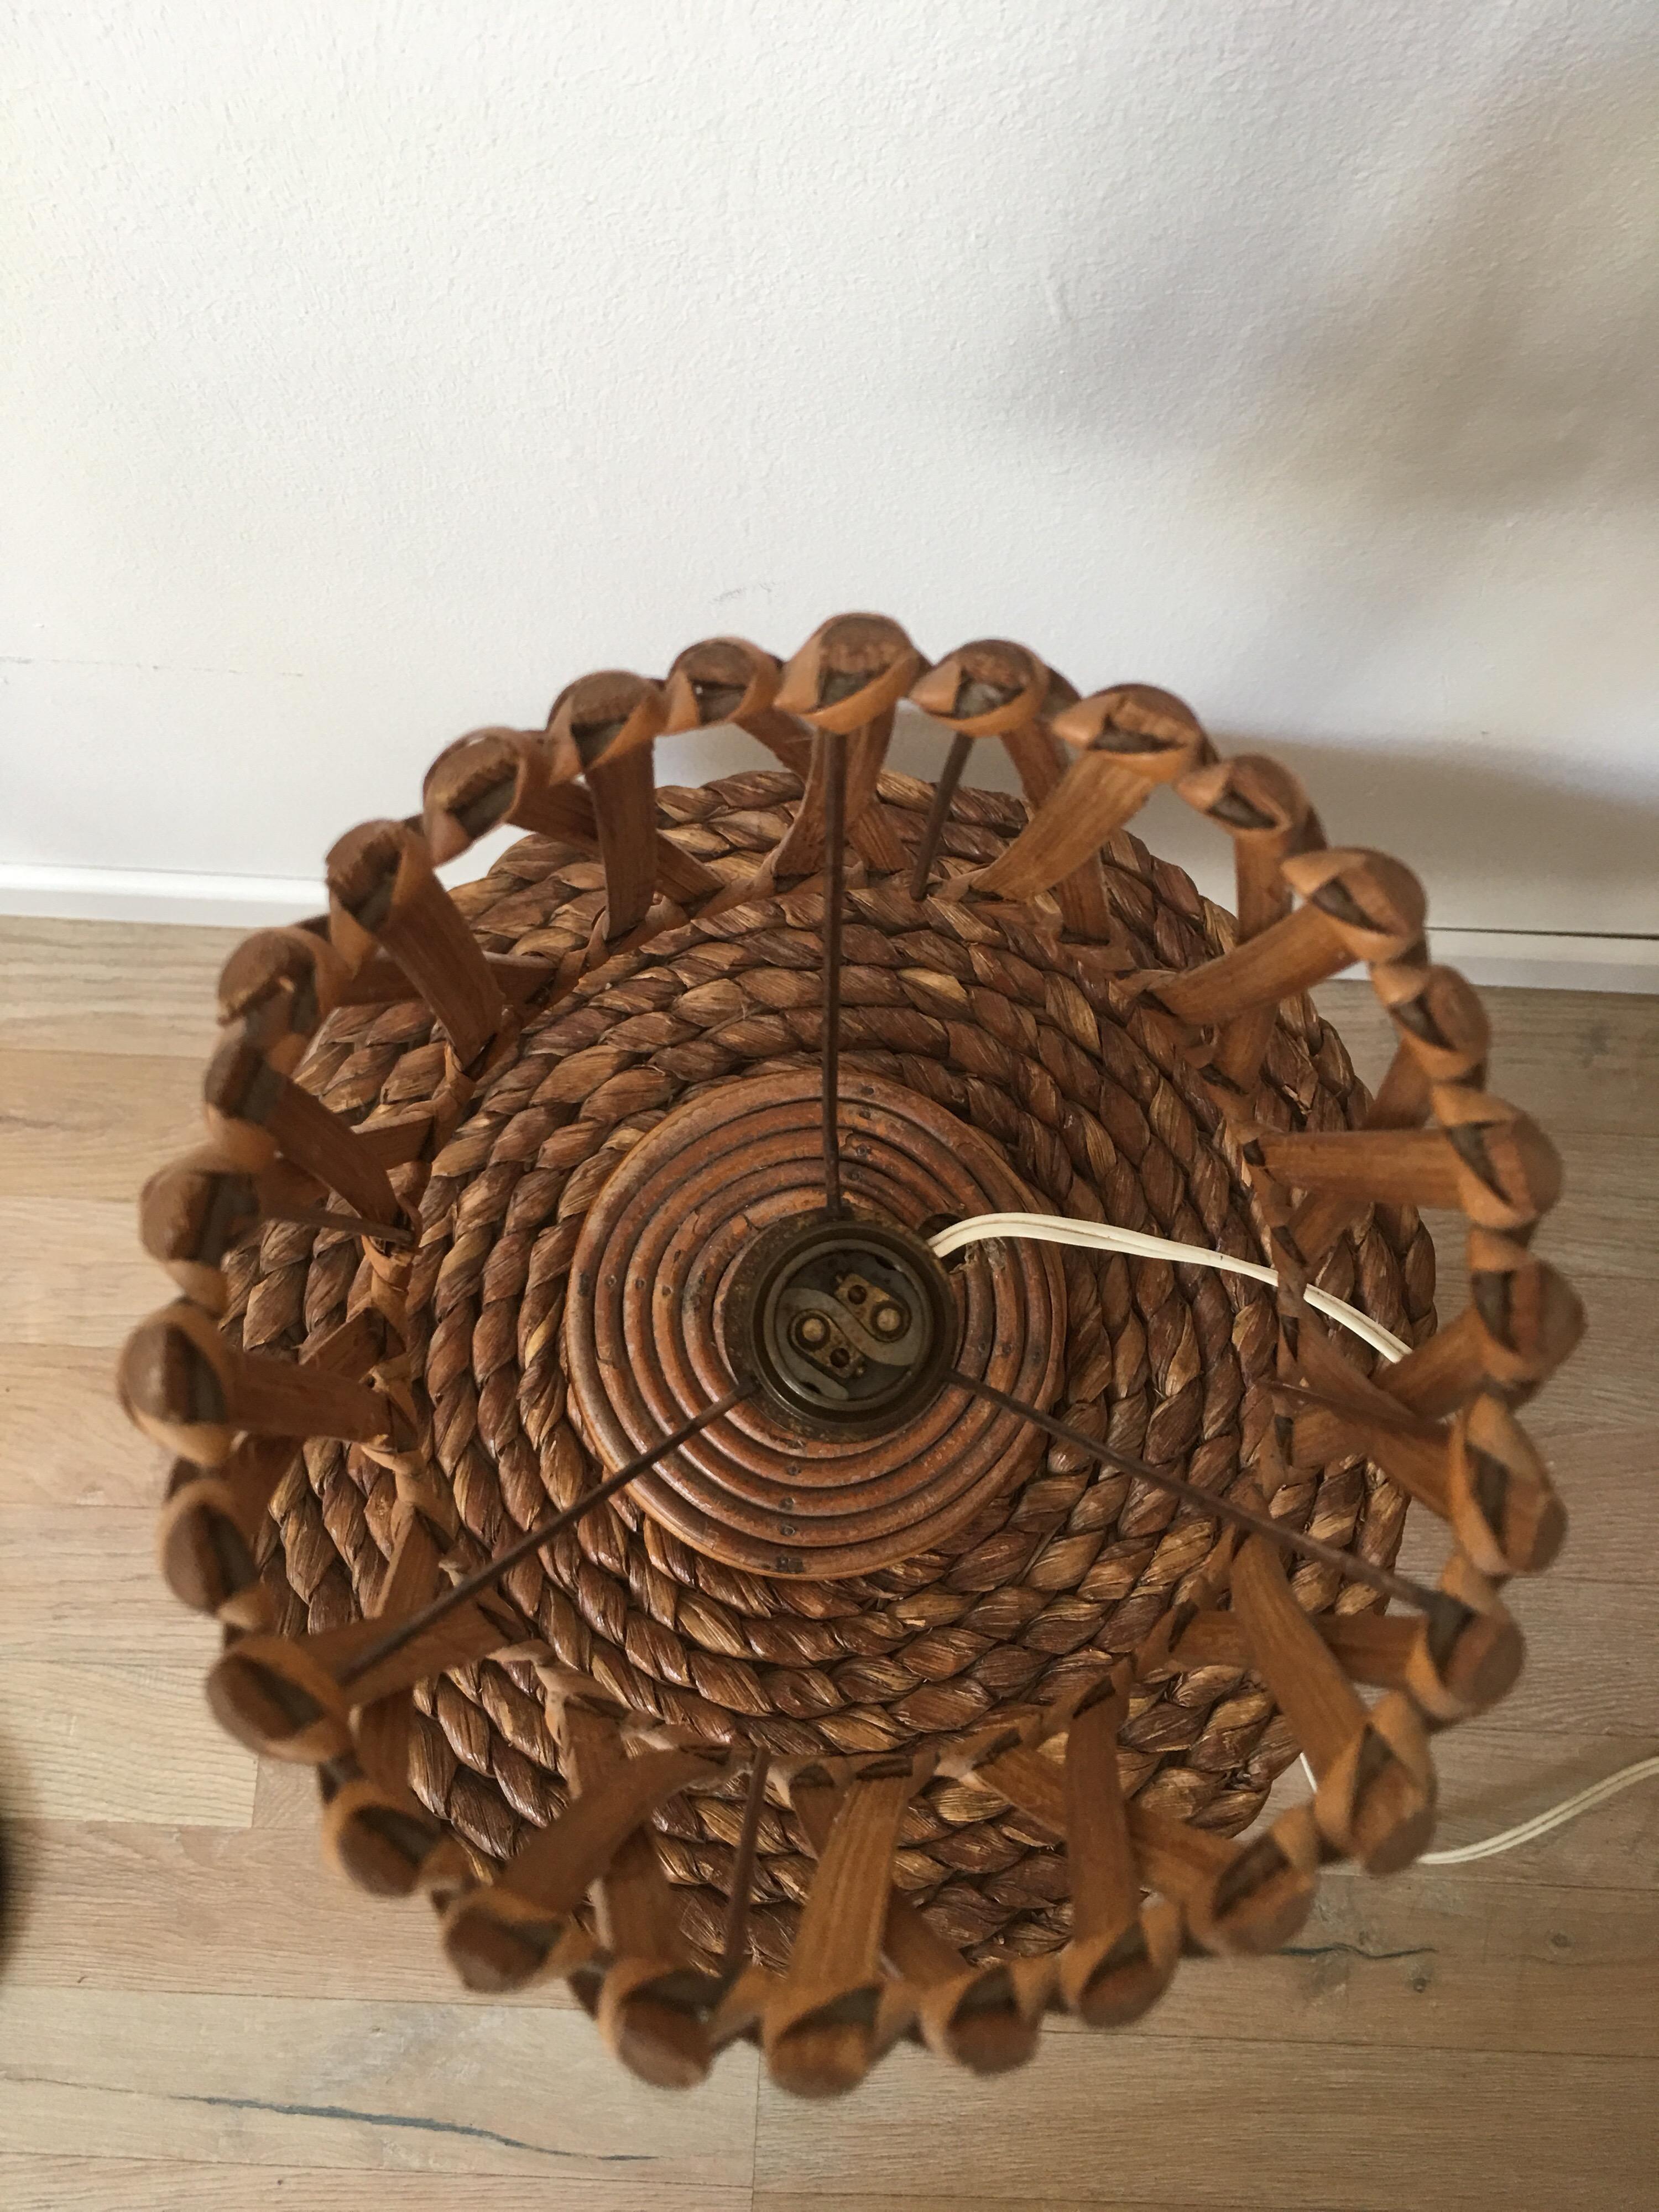 Louis Sognot Rattan Table Lamp, Original Rattan Lampshade, French, 1950s For Sale 3